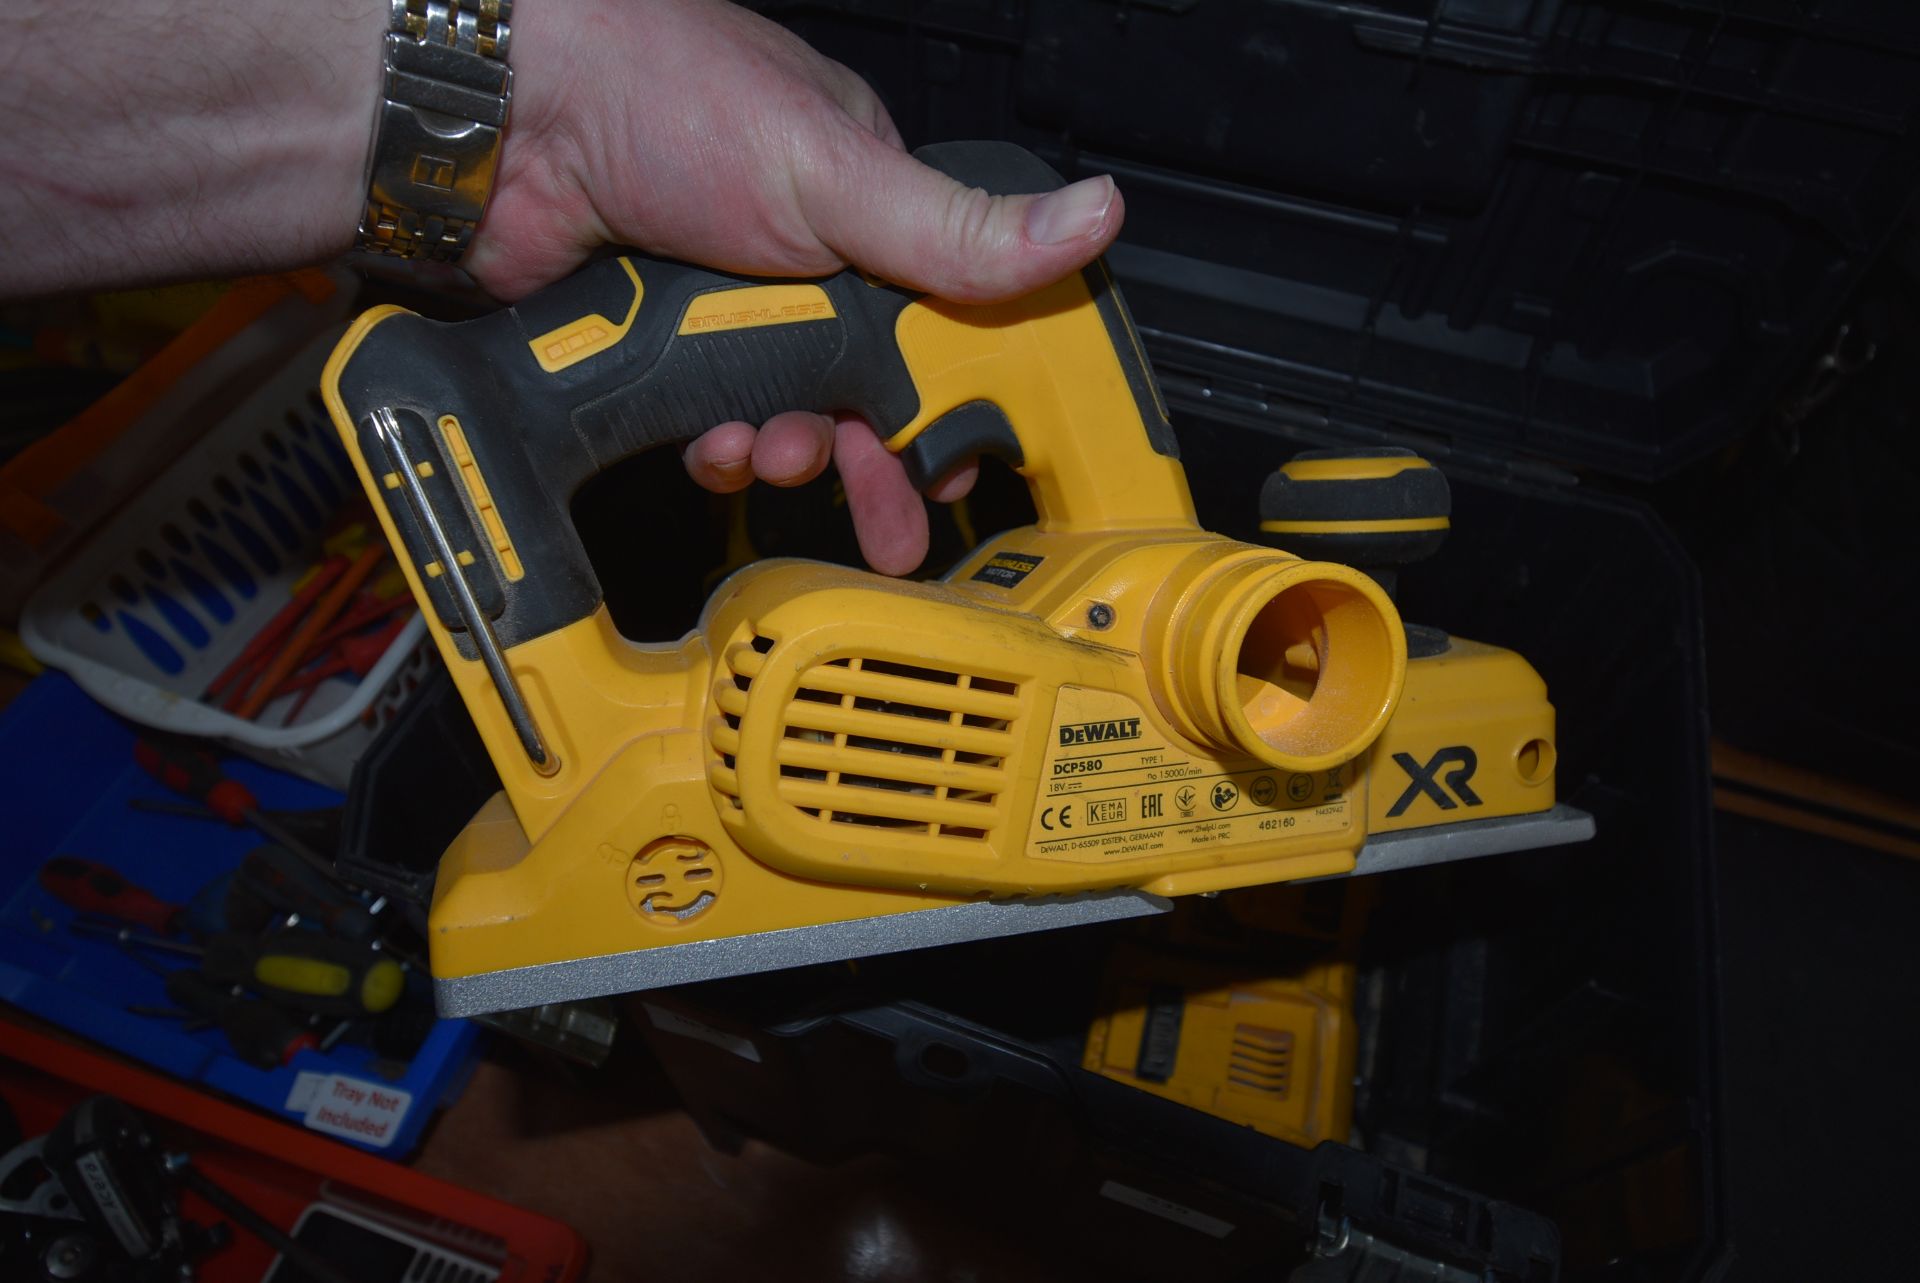 Four Dewalt Battery Operated Tools: Jig Saw, Palm Sander, Driver, and Planer (no batteries) with - Image 3 of 5